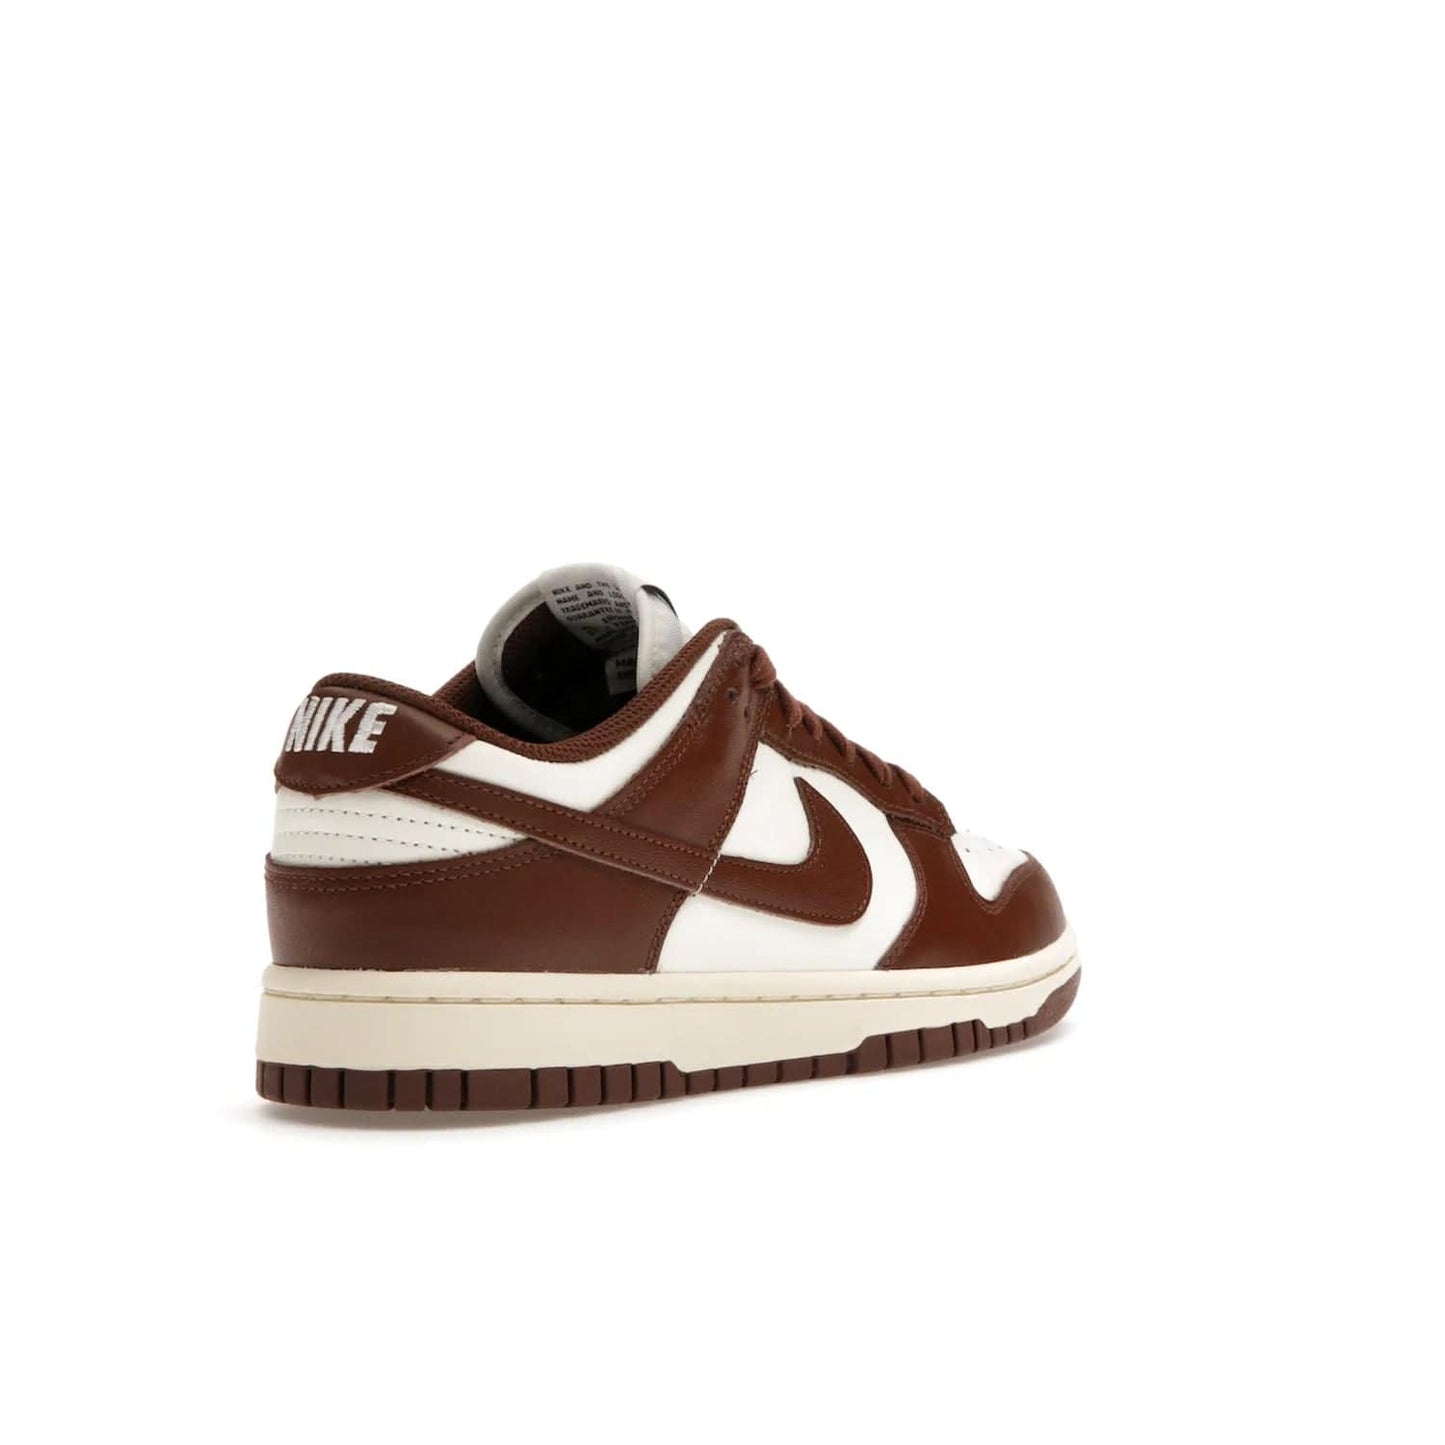 Nike Dunk Low Cacao Wow (Women's) - Image 32 - Only at www.BallersClubKickz.com - Revised
Get the Nike Dunk Low Cacao Wow and make a statement! Plush leather and a cool Cacao Wow finish bring together a unique mix of comfort and fashion that will turn heads. Boosted with a Coconut Milk hue. Shop today.